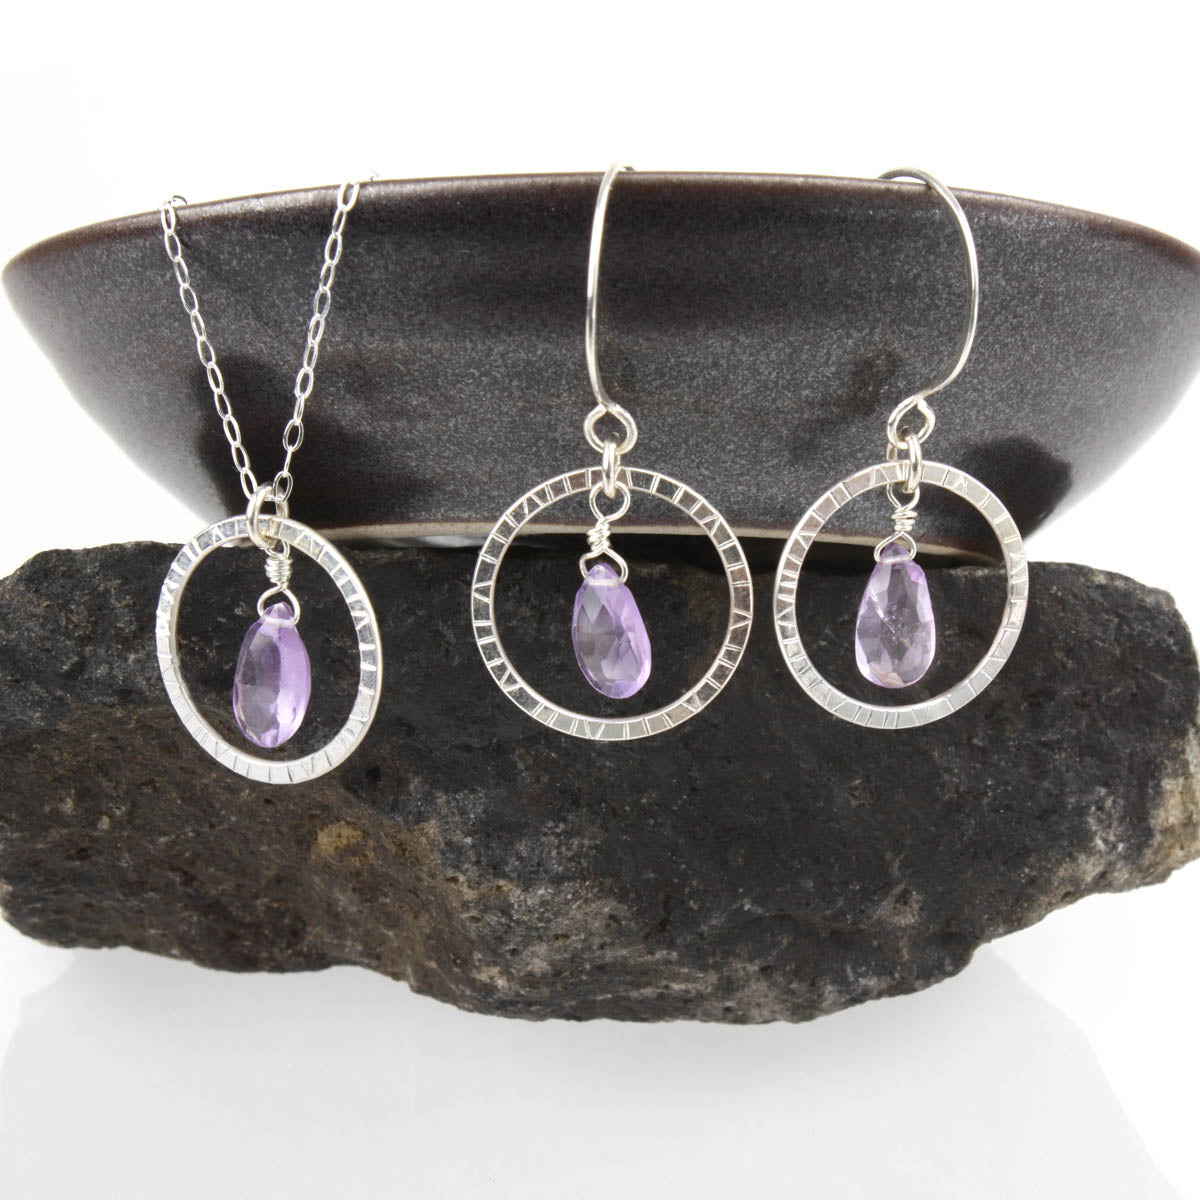 Navigator Necklace with Amethyst